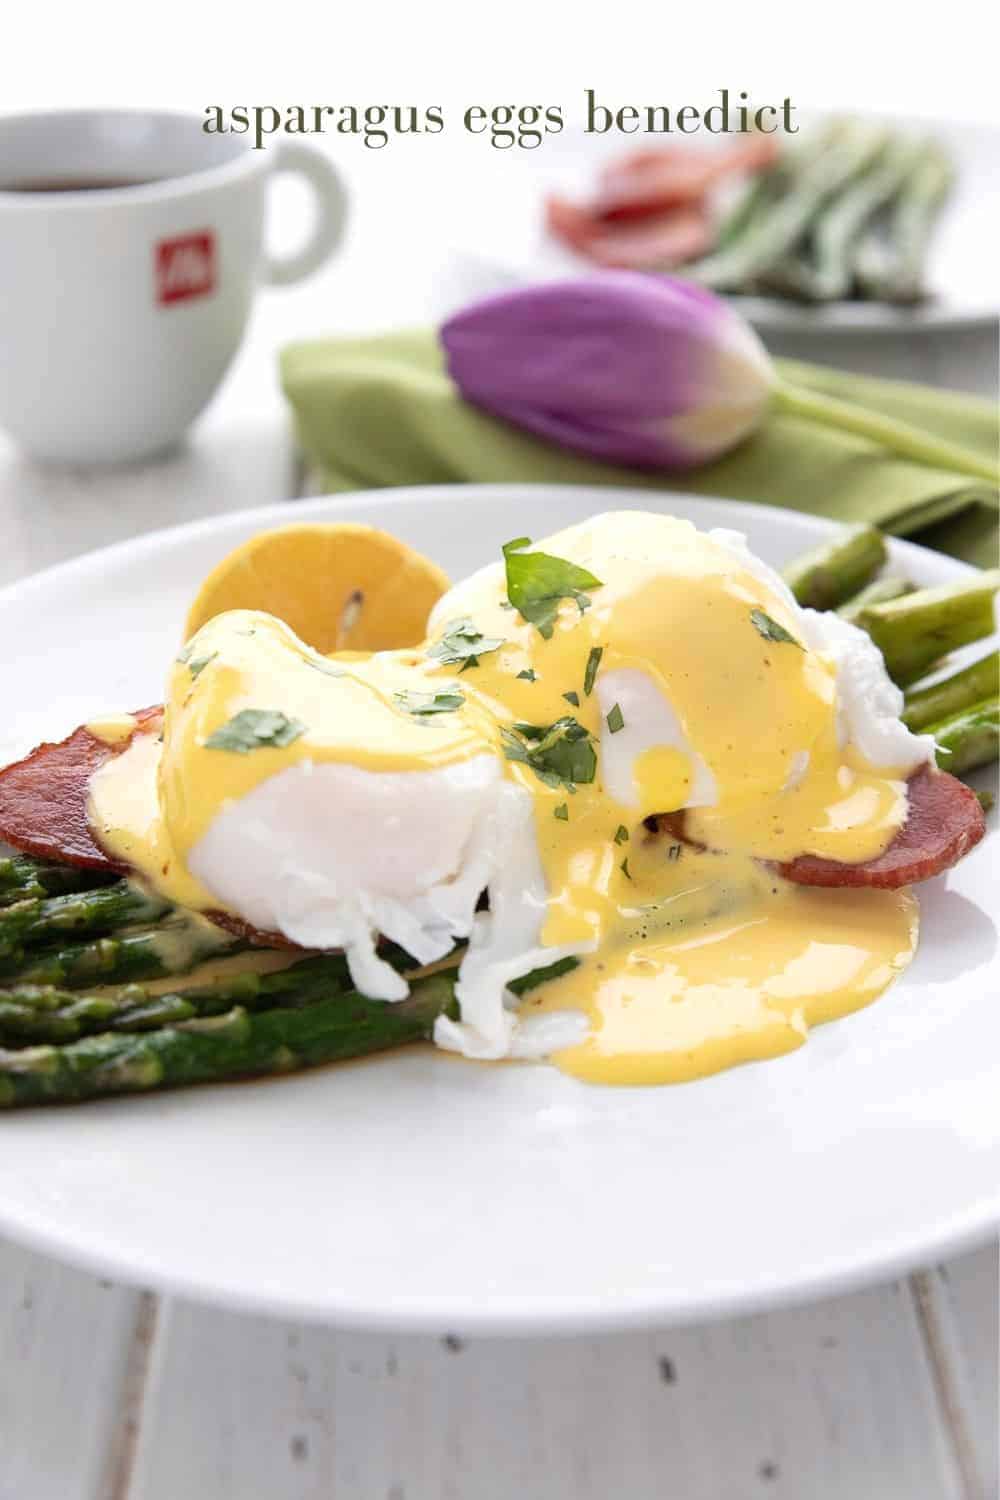 Is it Safe to Eat Eggs Benedict During Pregnancy